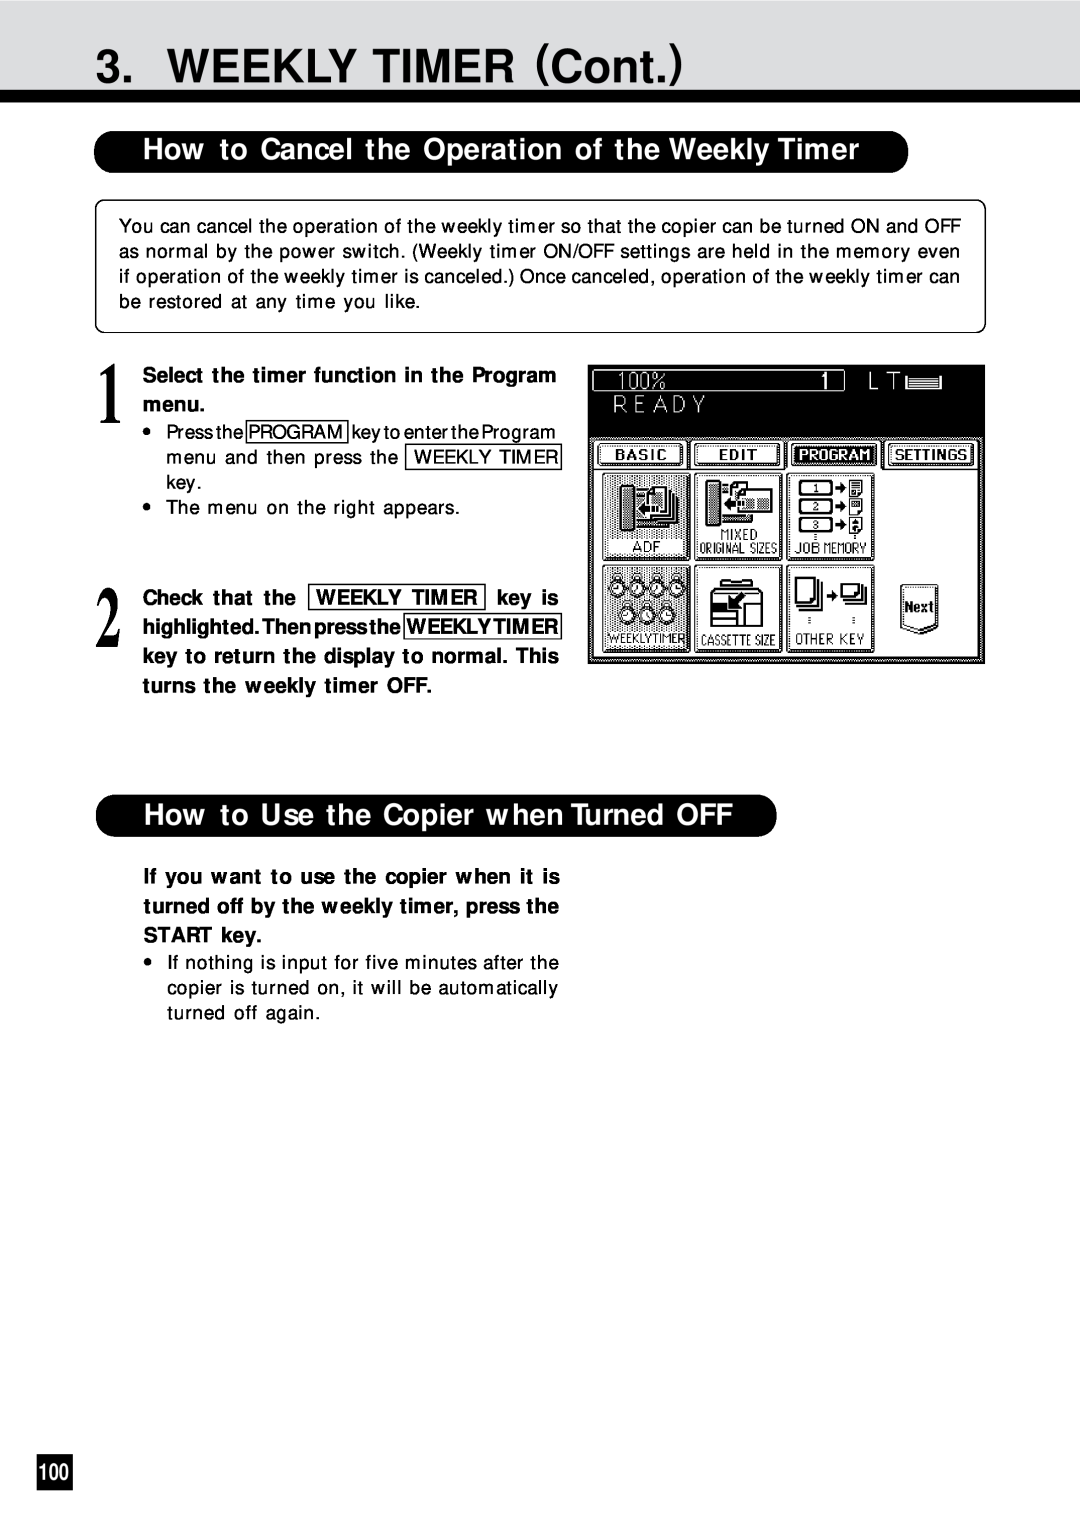 Sharp AR-650 WEEKLY TIMER Cont, How to Cancel the Operation of the Weekly Timer, How to Use the Copier when Turned OFF 